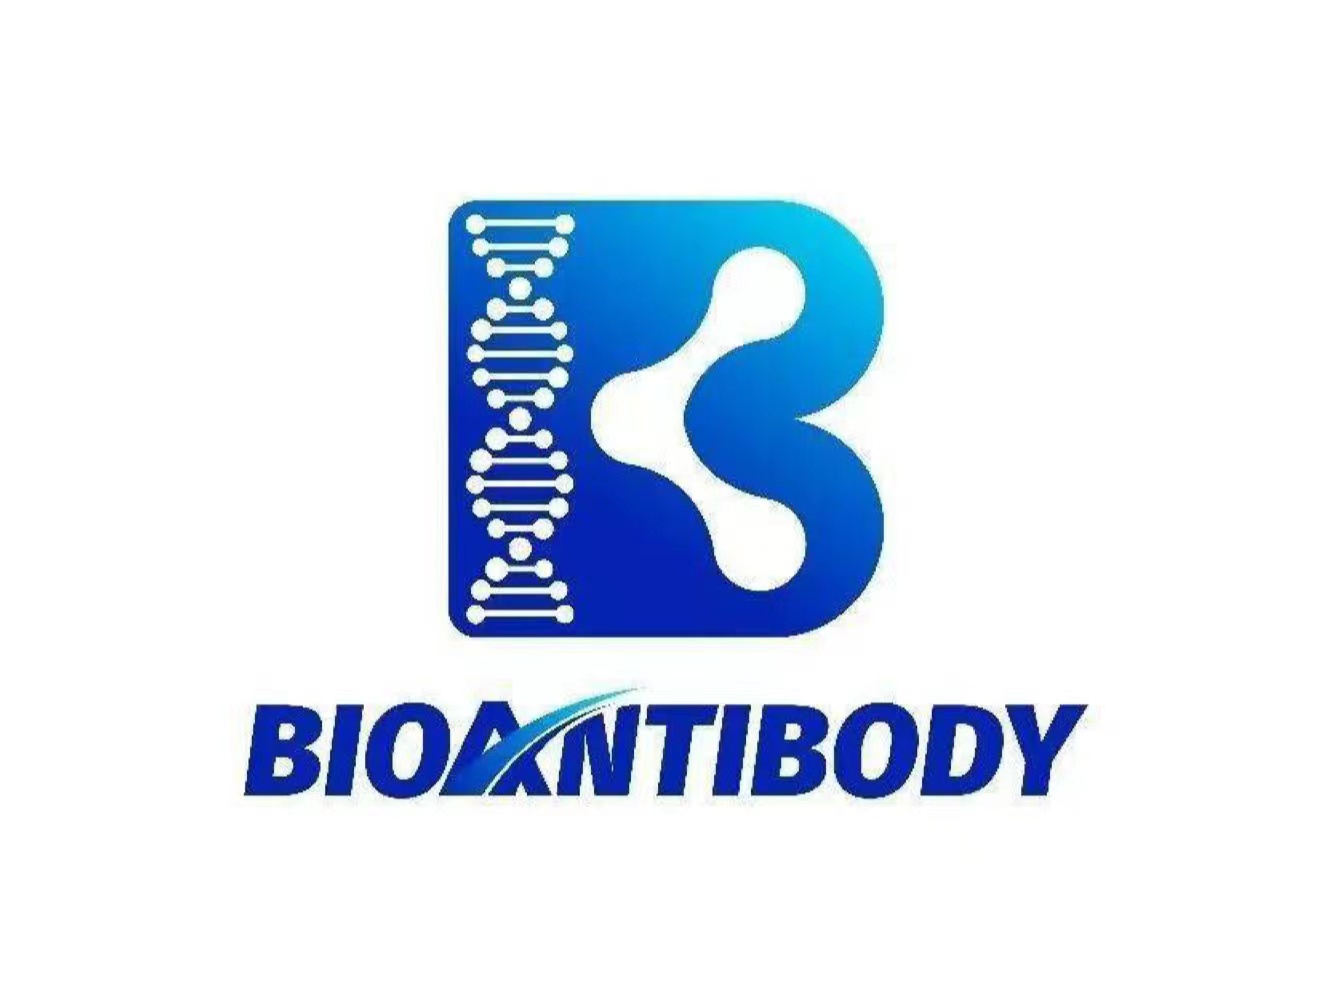 Bioantibody has completed its nearly 100 million CNY first round of financing